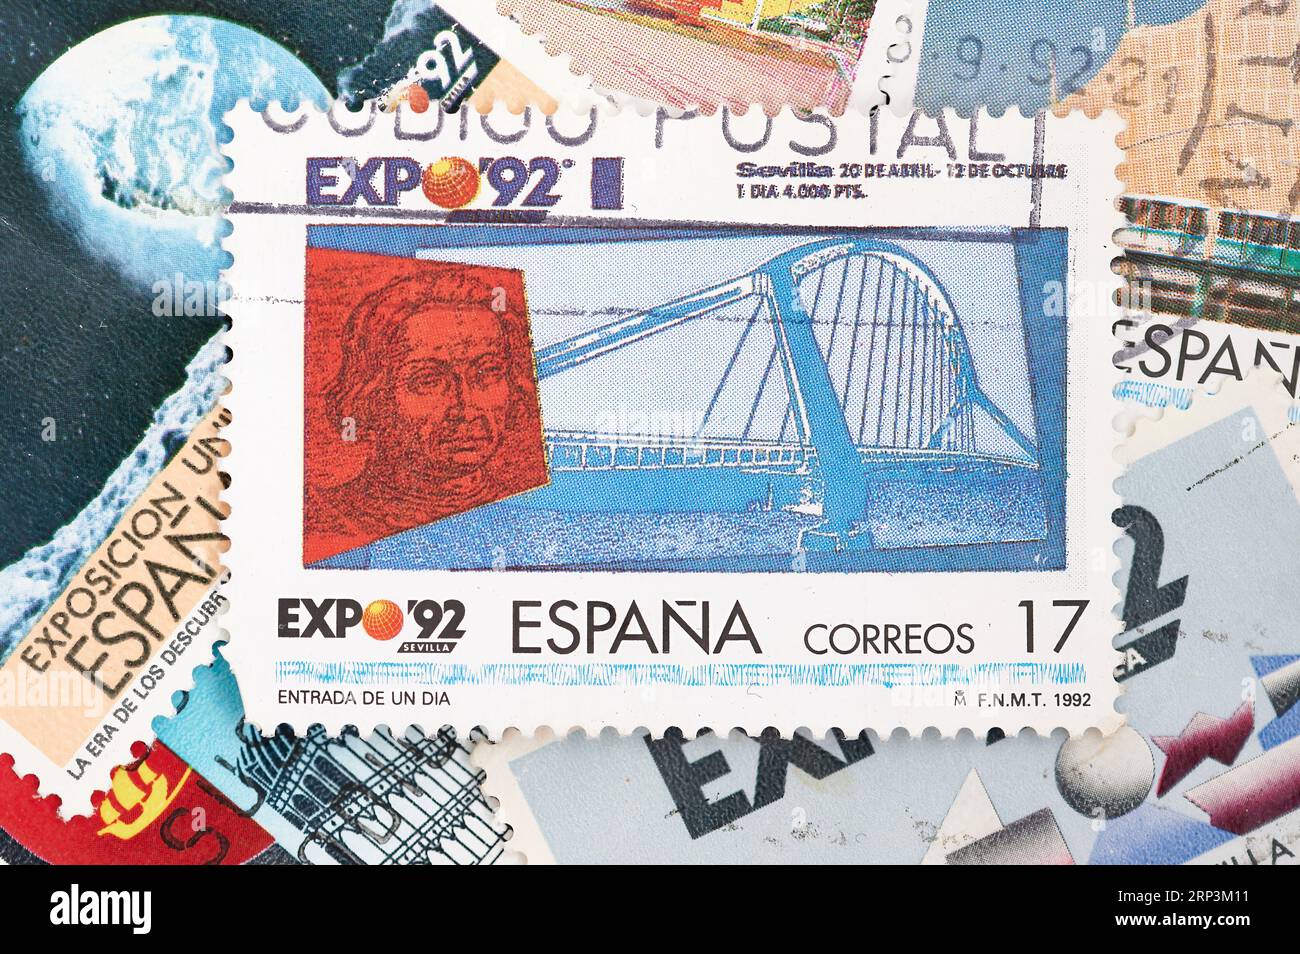 Madrid, Spain; 08-13-2023: Postage stamp from Spain with motifs about the universal exhibition of the year 1992 'Expo92' that took place in Seville Stock Photo